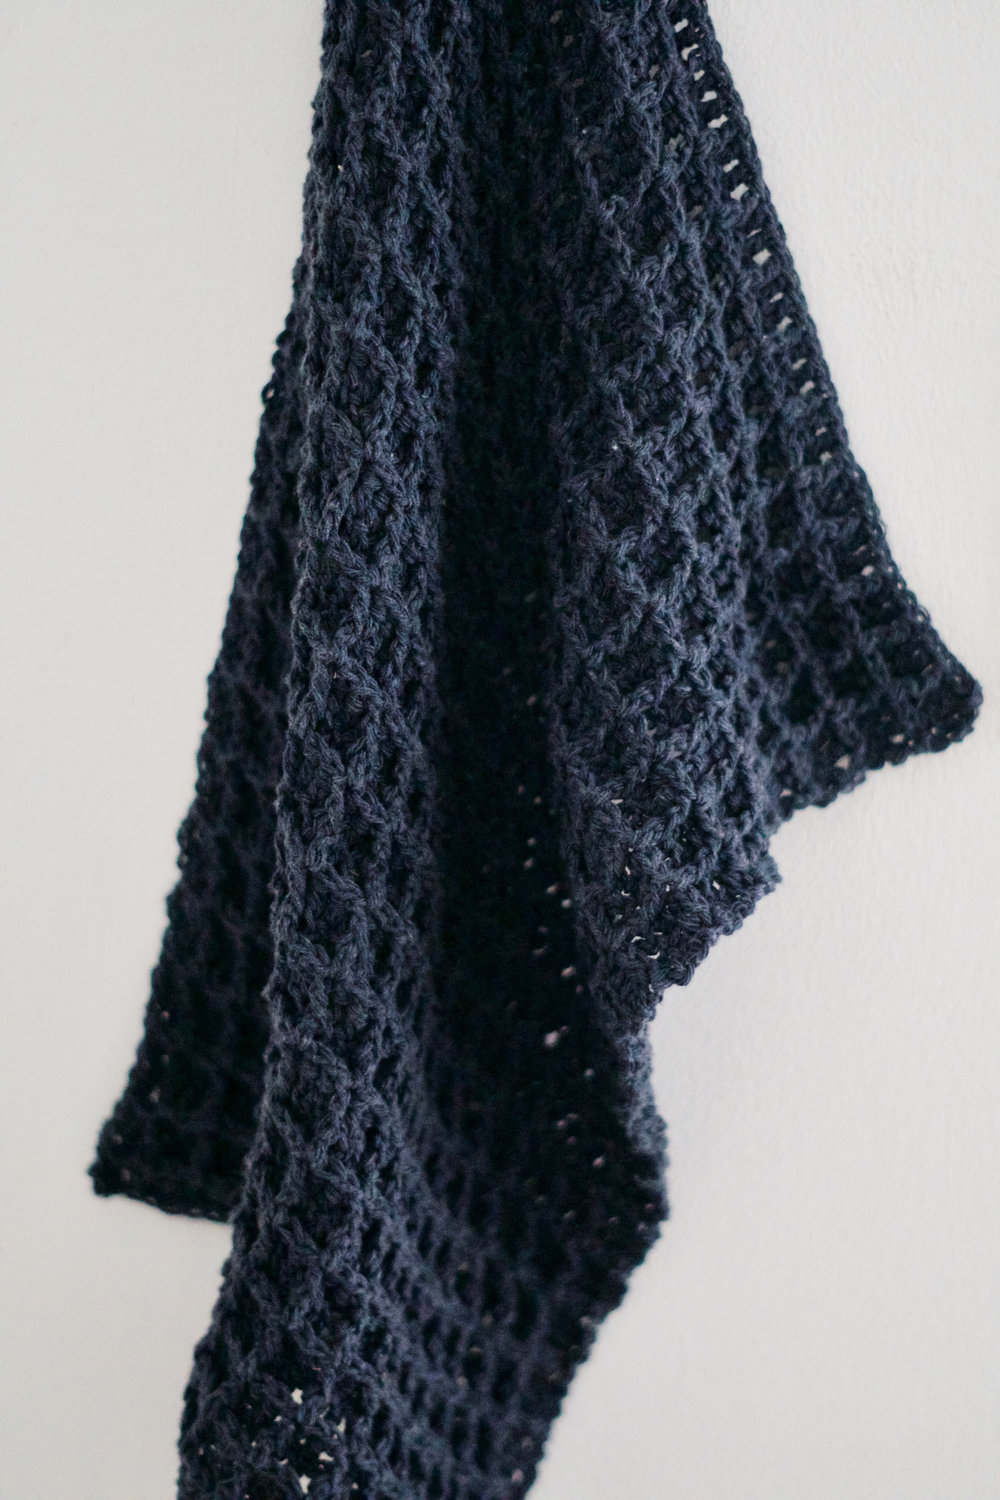 Barrow Hand Towel pattern by Two of Wands